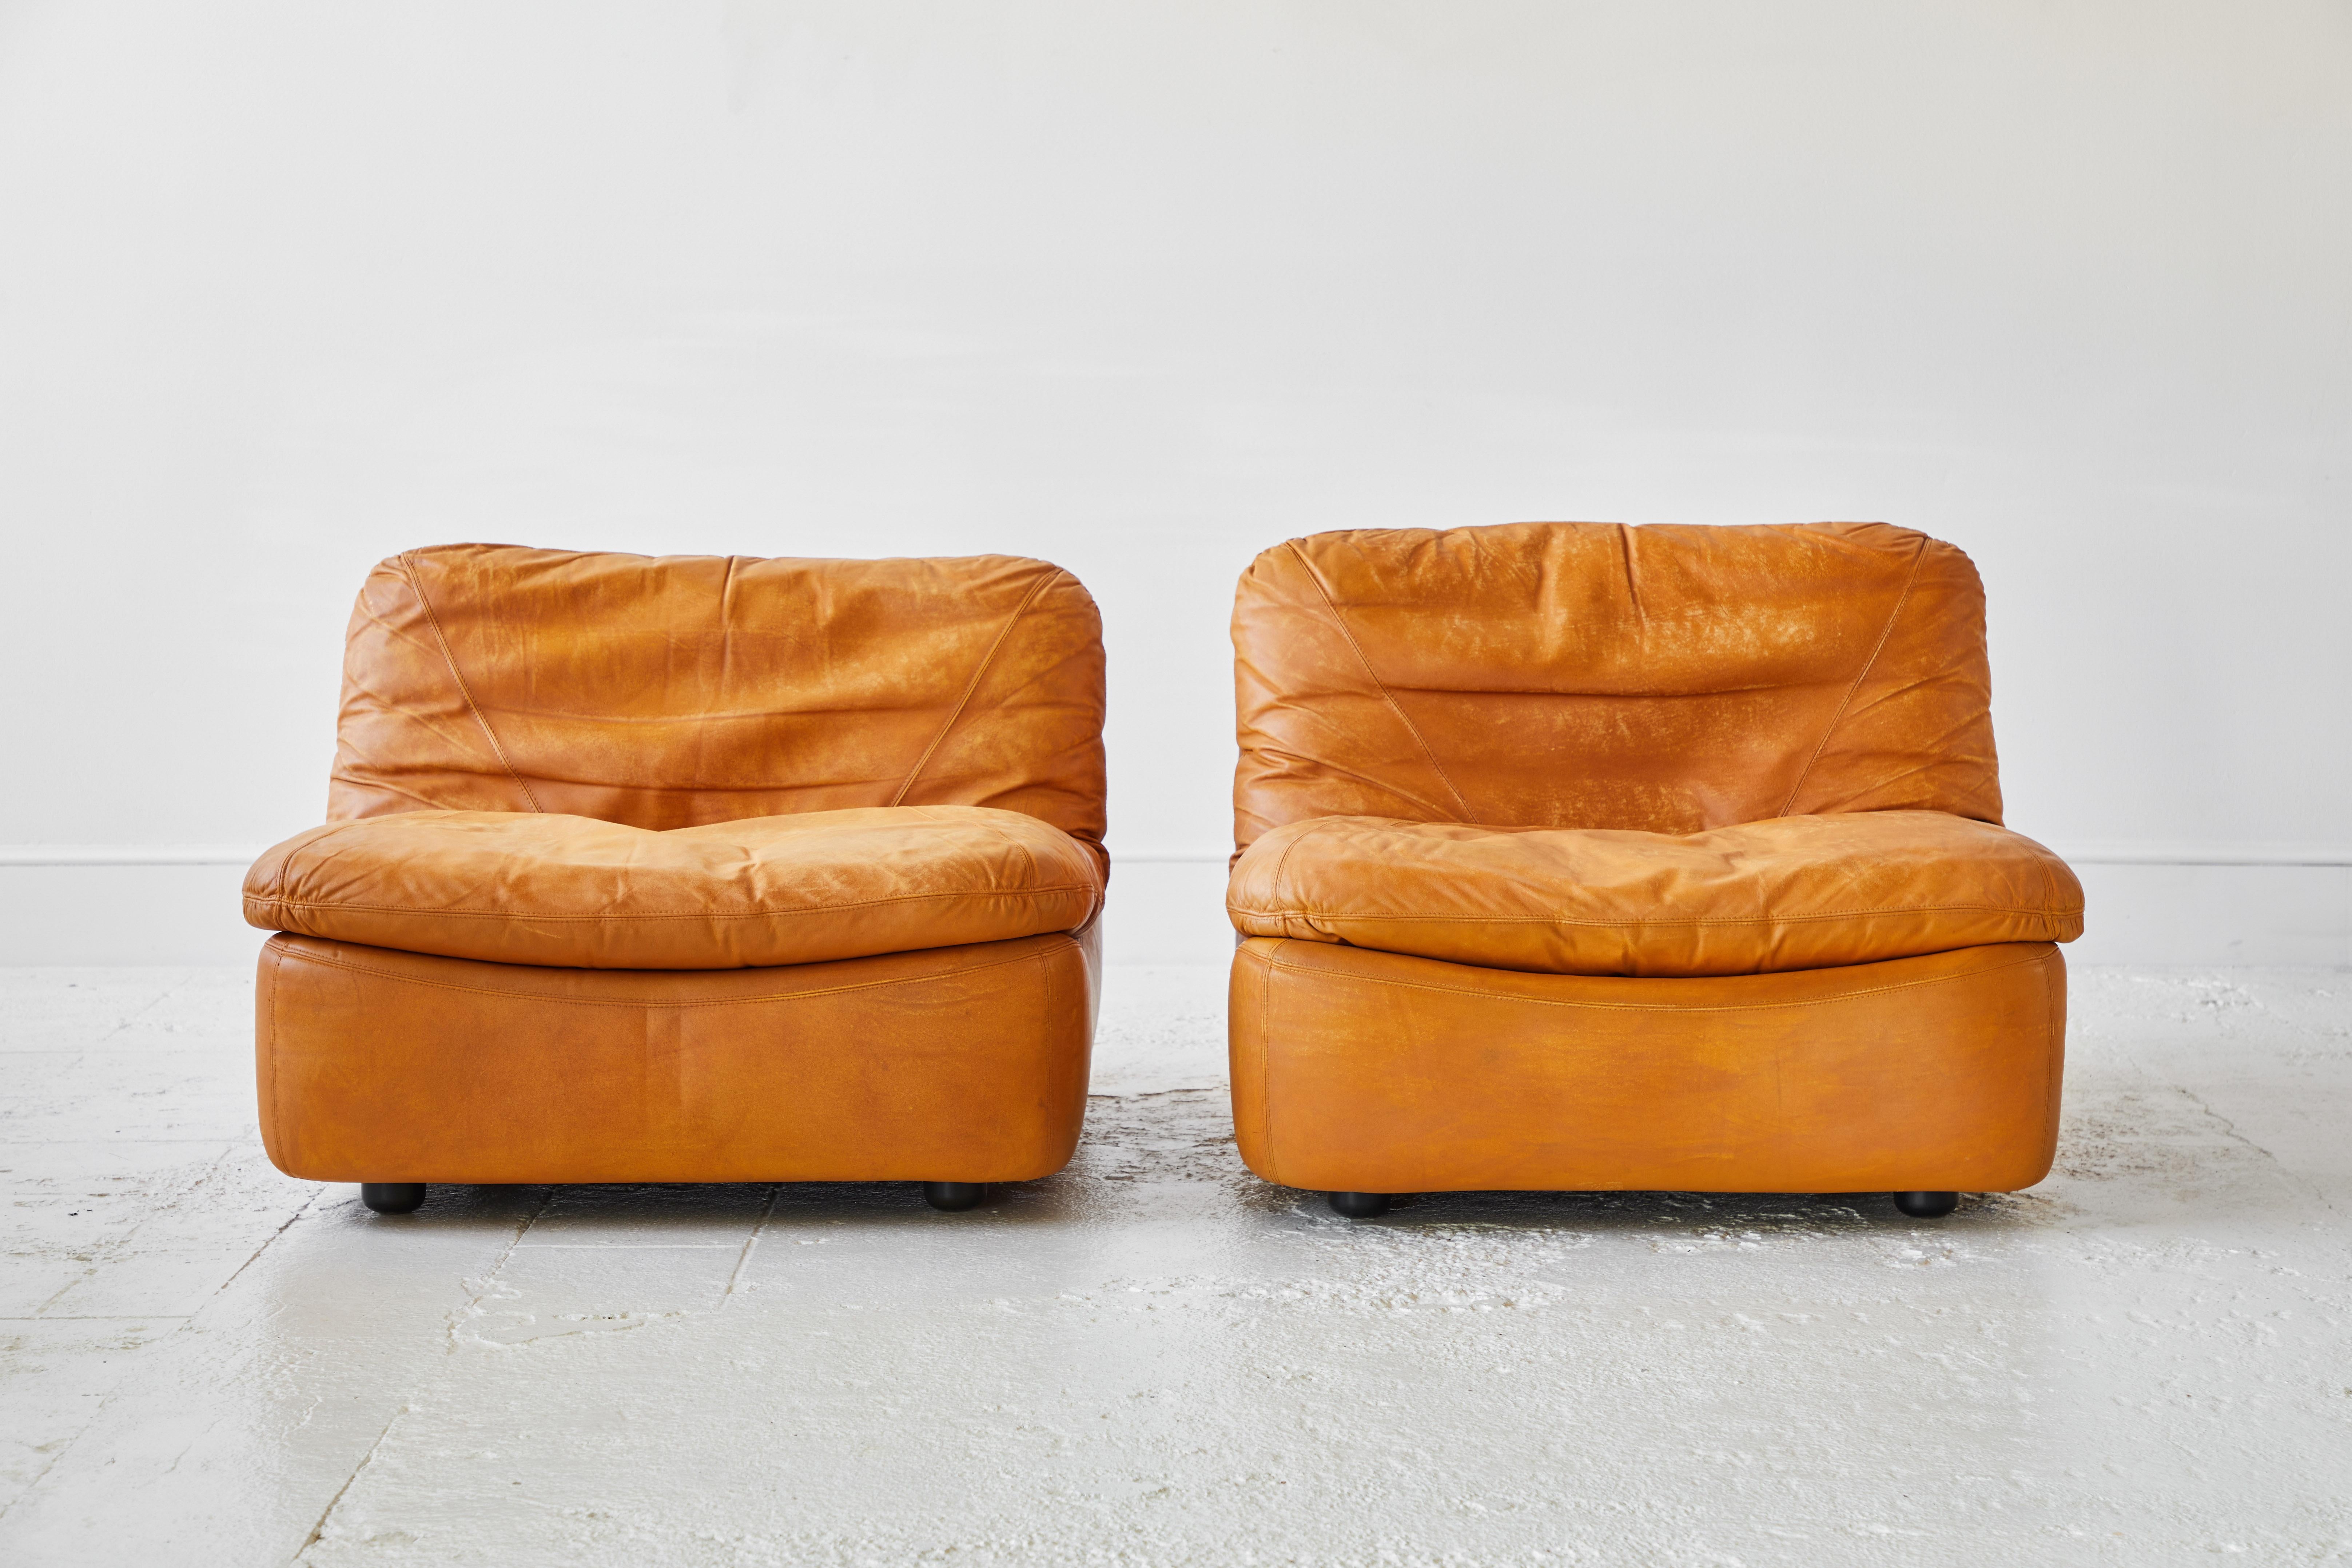 This pair of low relaxed slouchy lounge chairs has boxed frame with comfy seat cushions that rest on top of the frame structure. The armless low chairs offer unique leather stitching. The design is very rare.